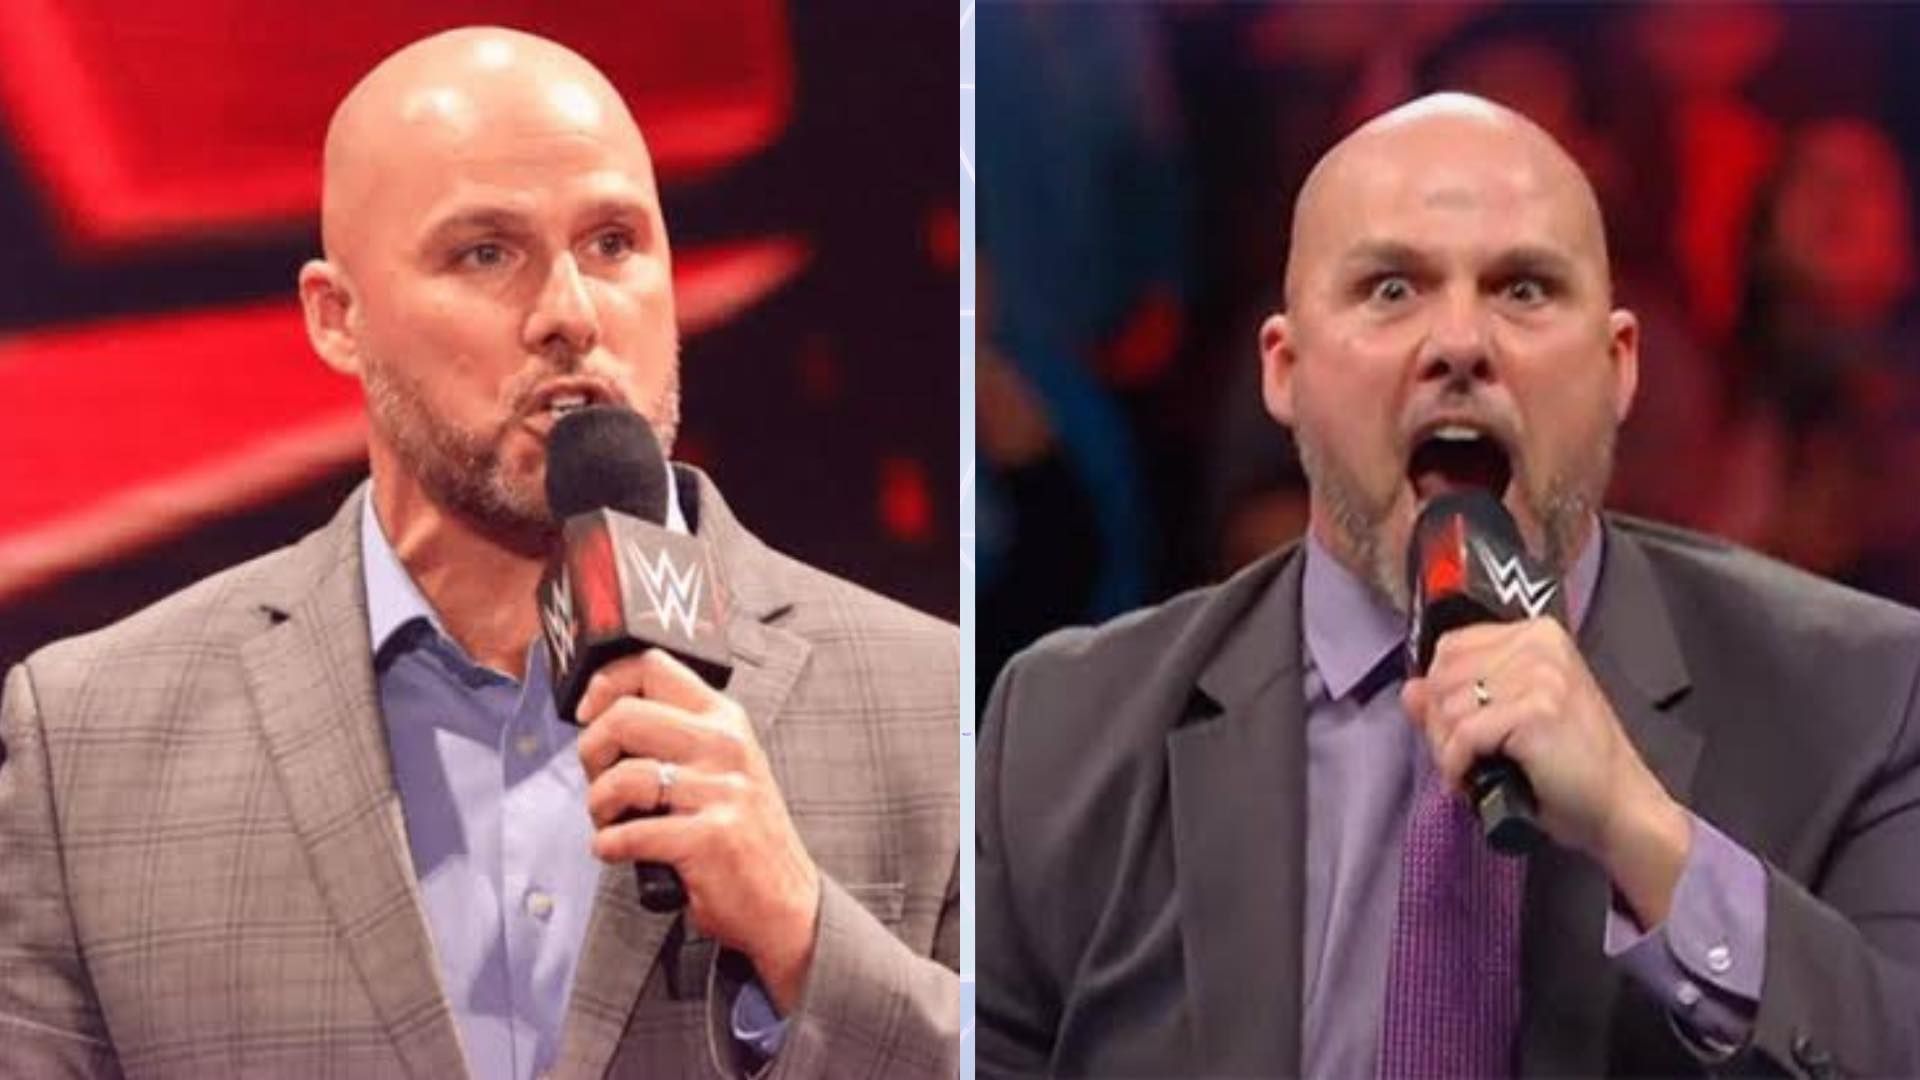 Adam Pearce is the General-Manager of WWE RAW.